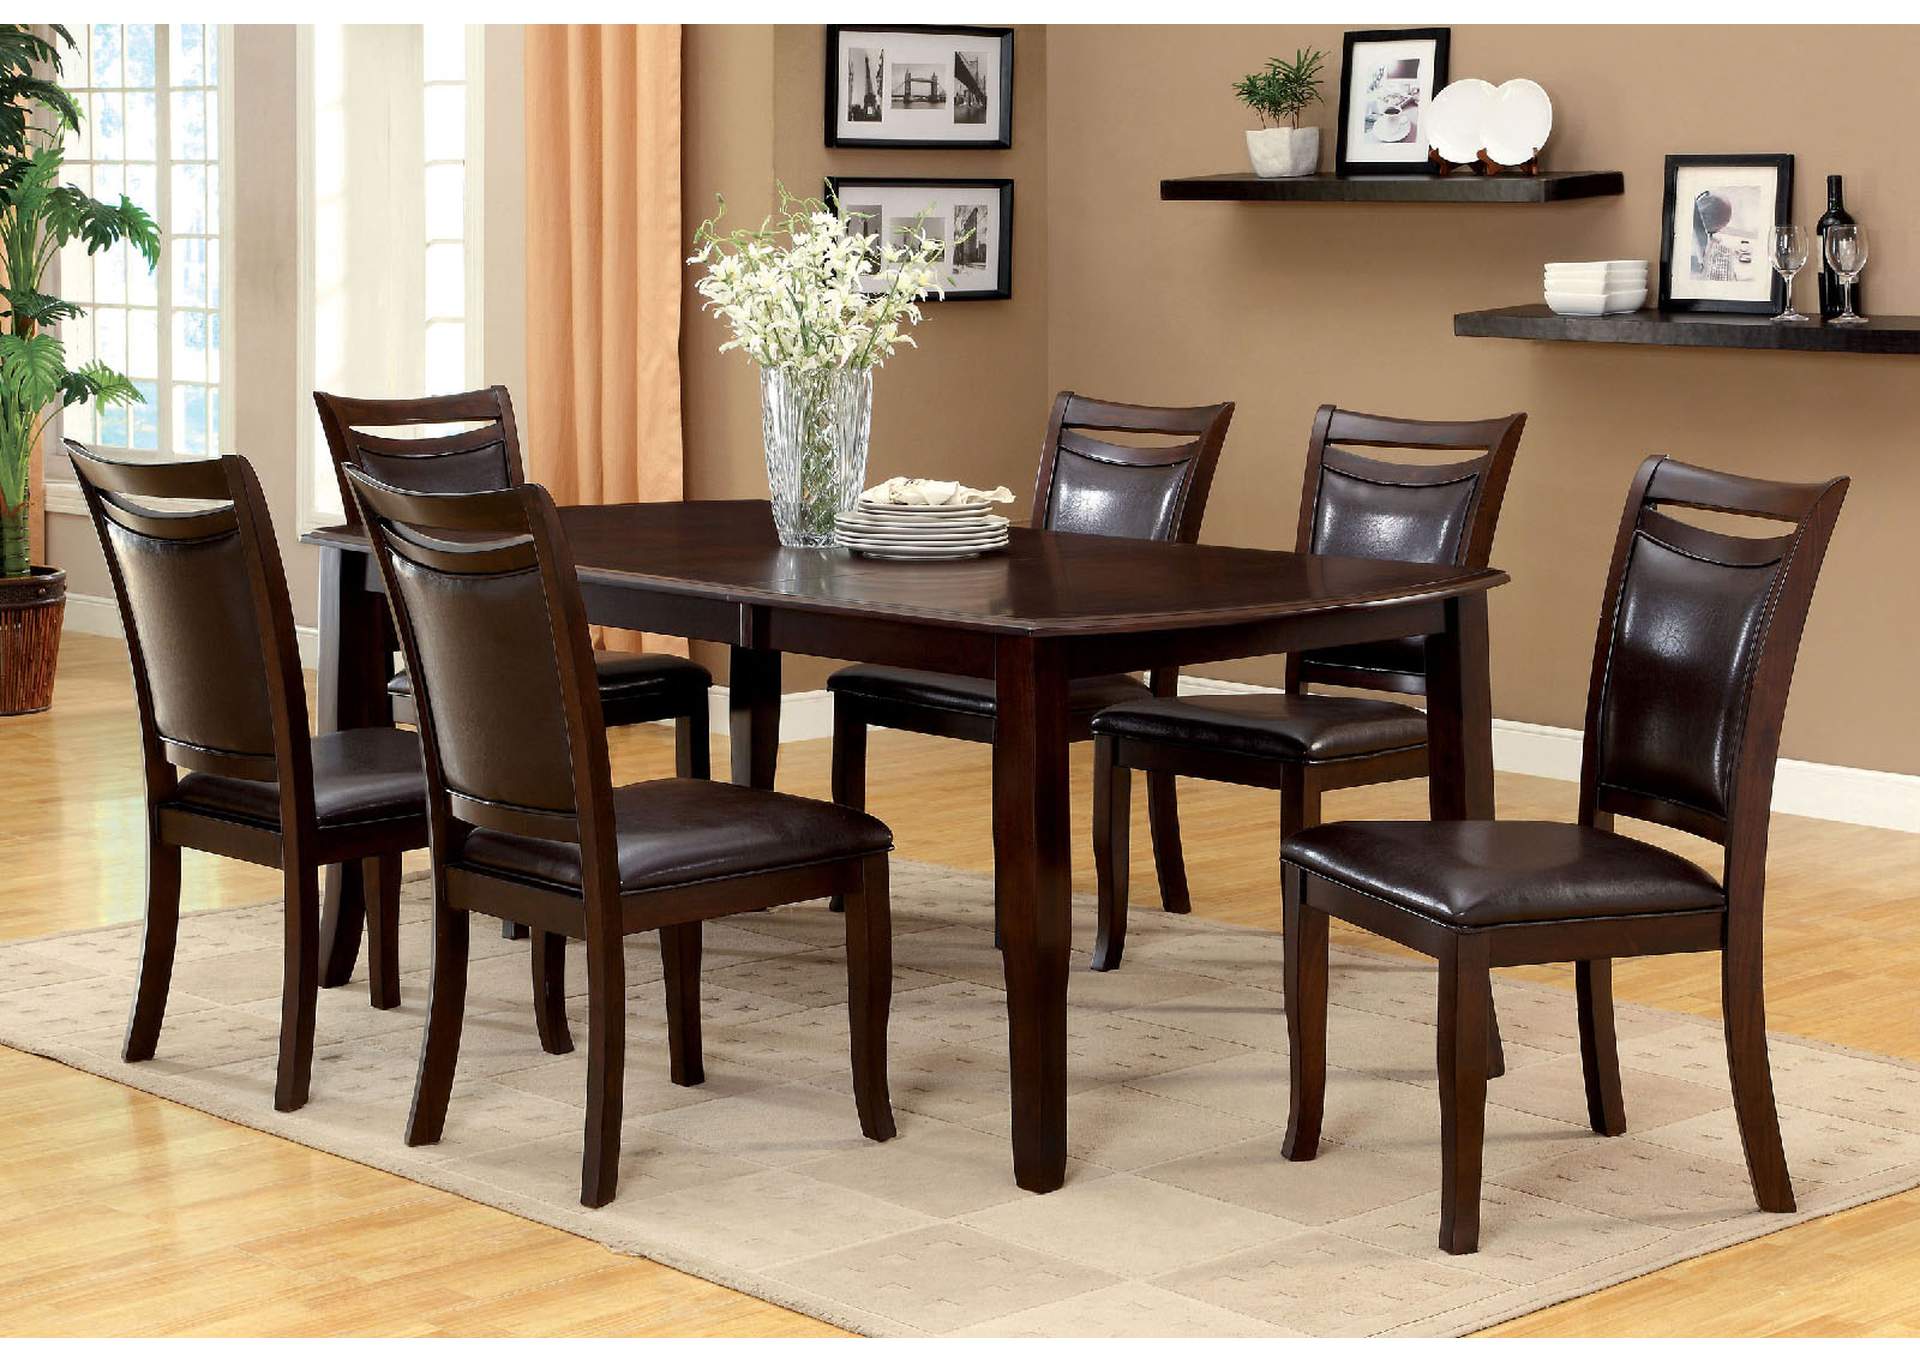 Woodside Dark Cherry Extension Leaf Dining Table w/4 Side Chair,Furniture of America